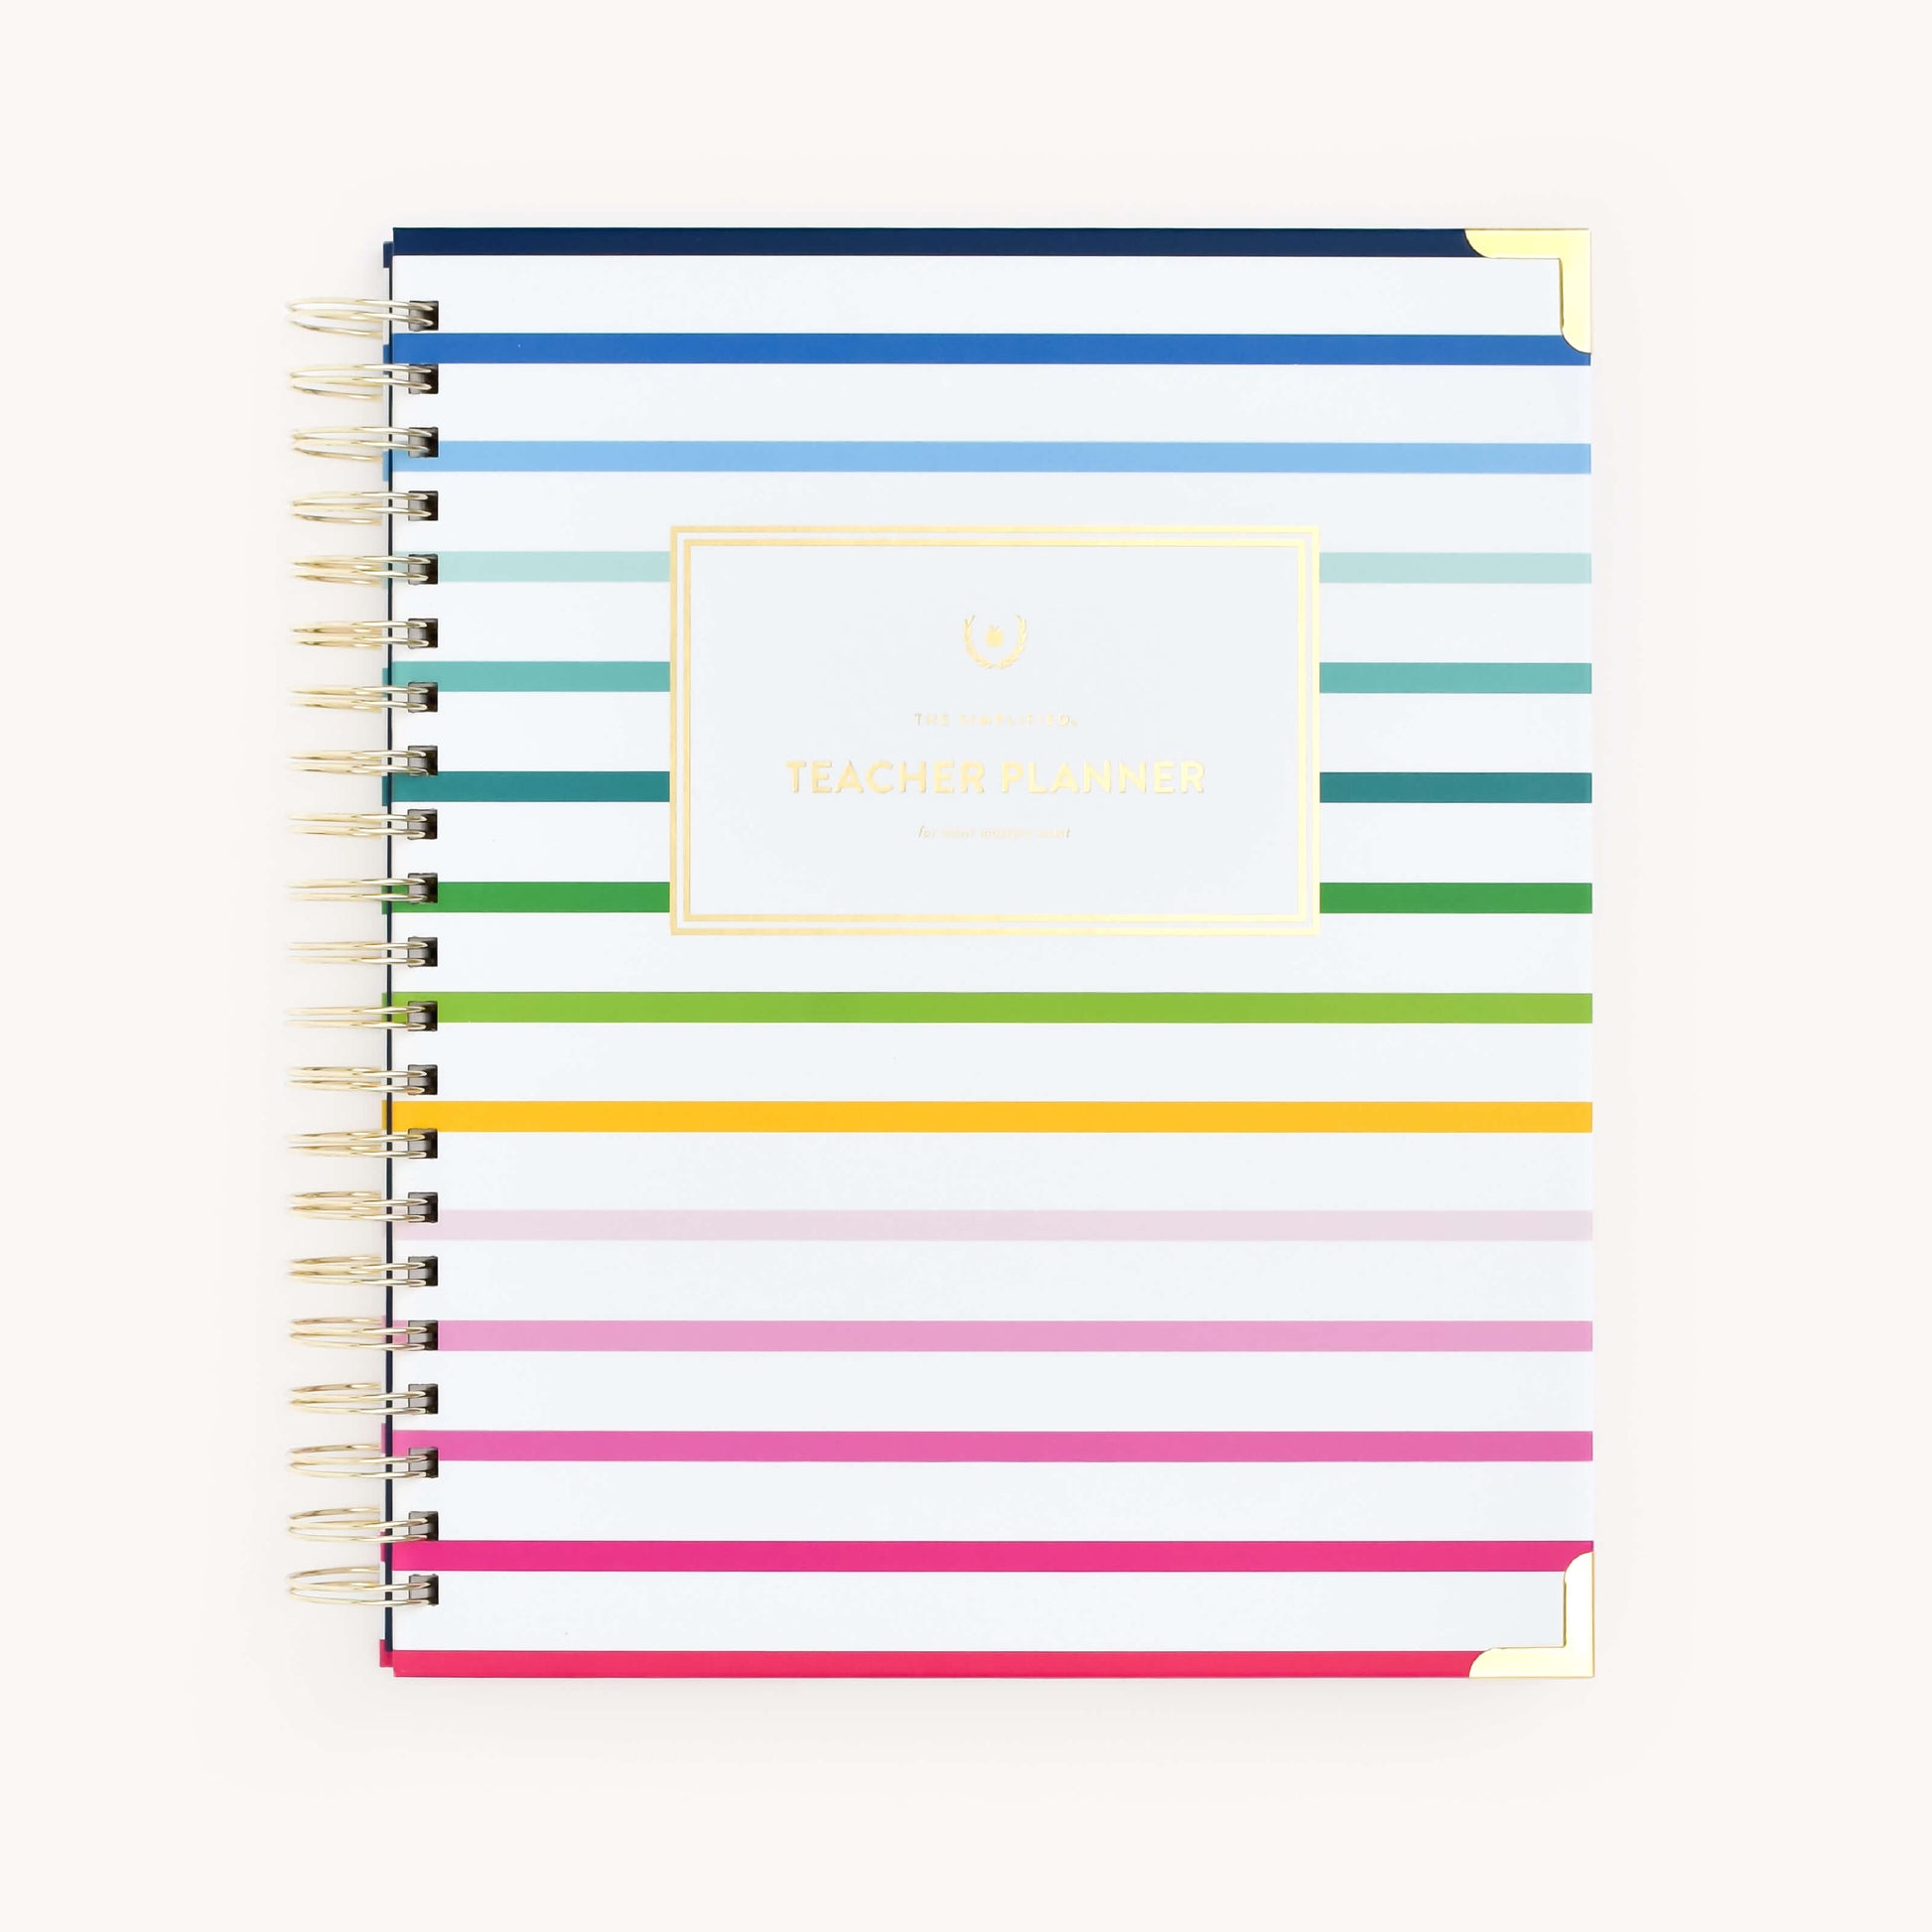 Sticker Book - Simplified | Gifts Under | Simplified by Emily Ley